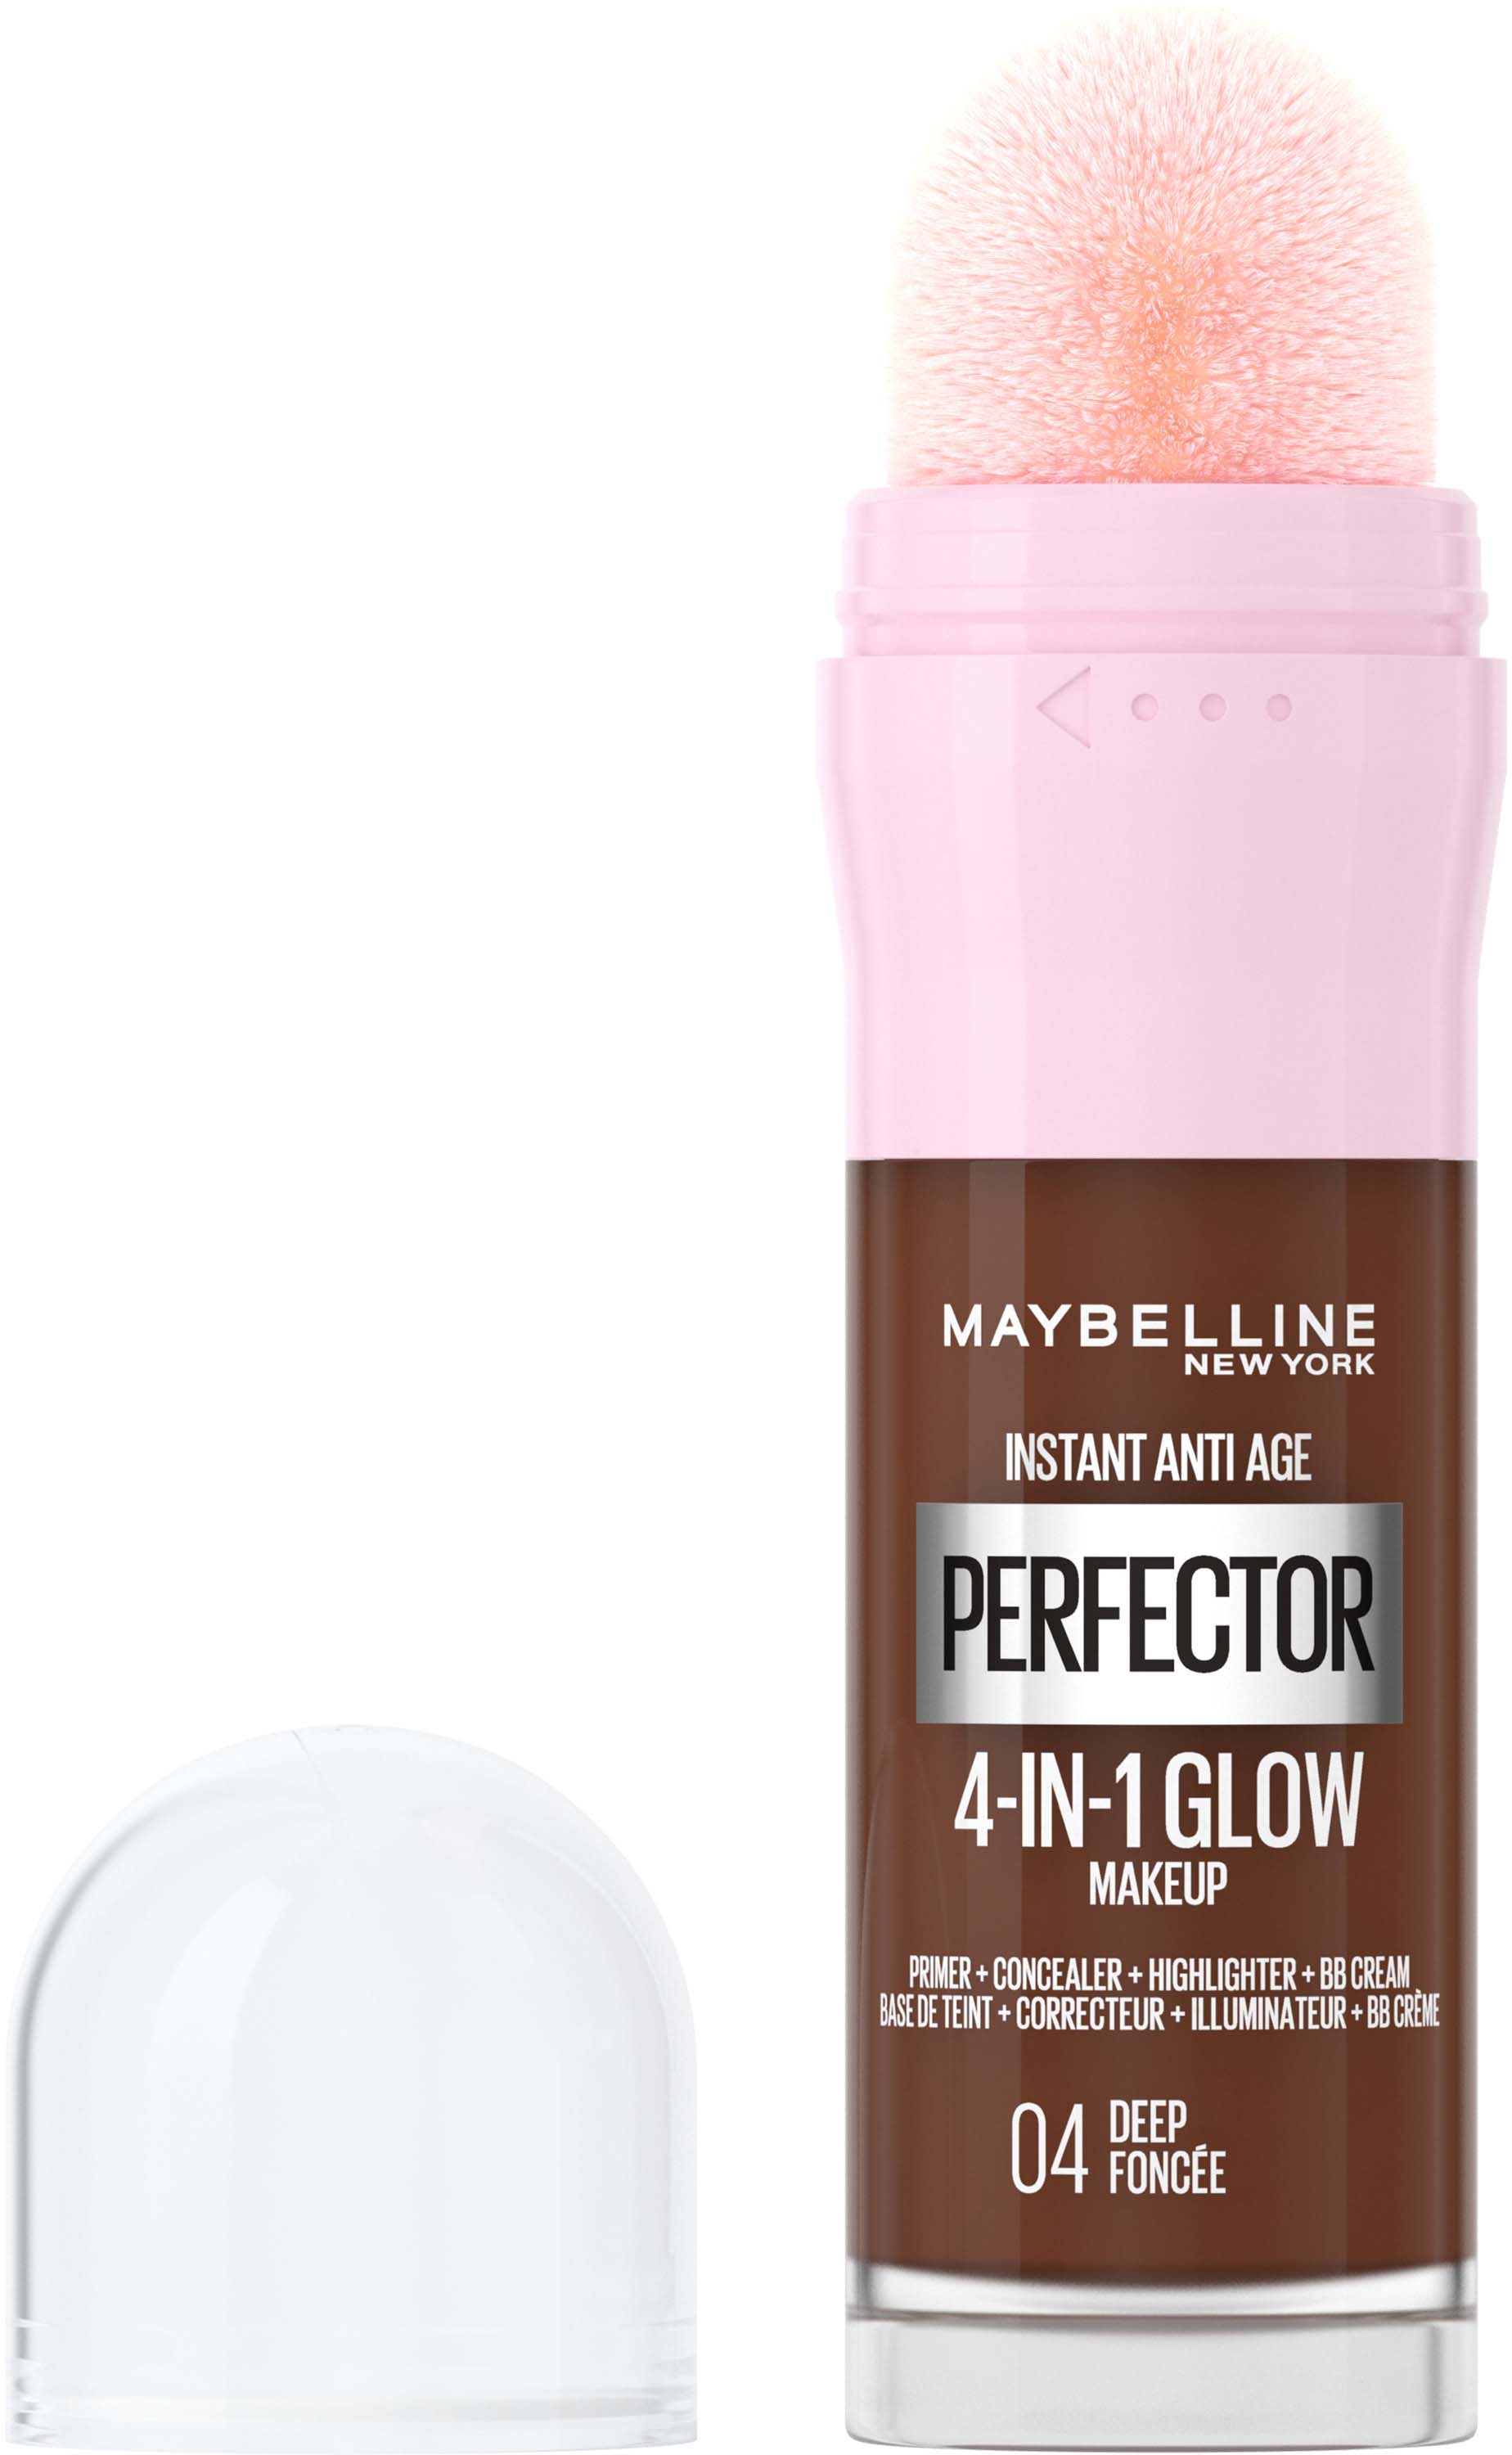 Makeup Instant Deep Glow Medium 03 4-in-1 York Perfector Maybelline Anti-Age New